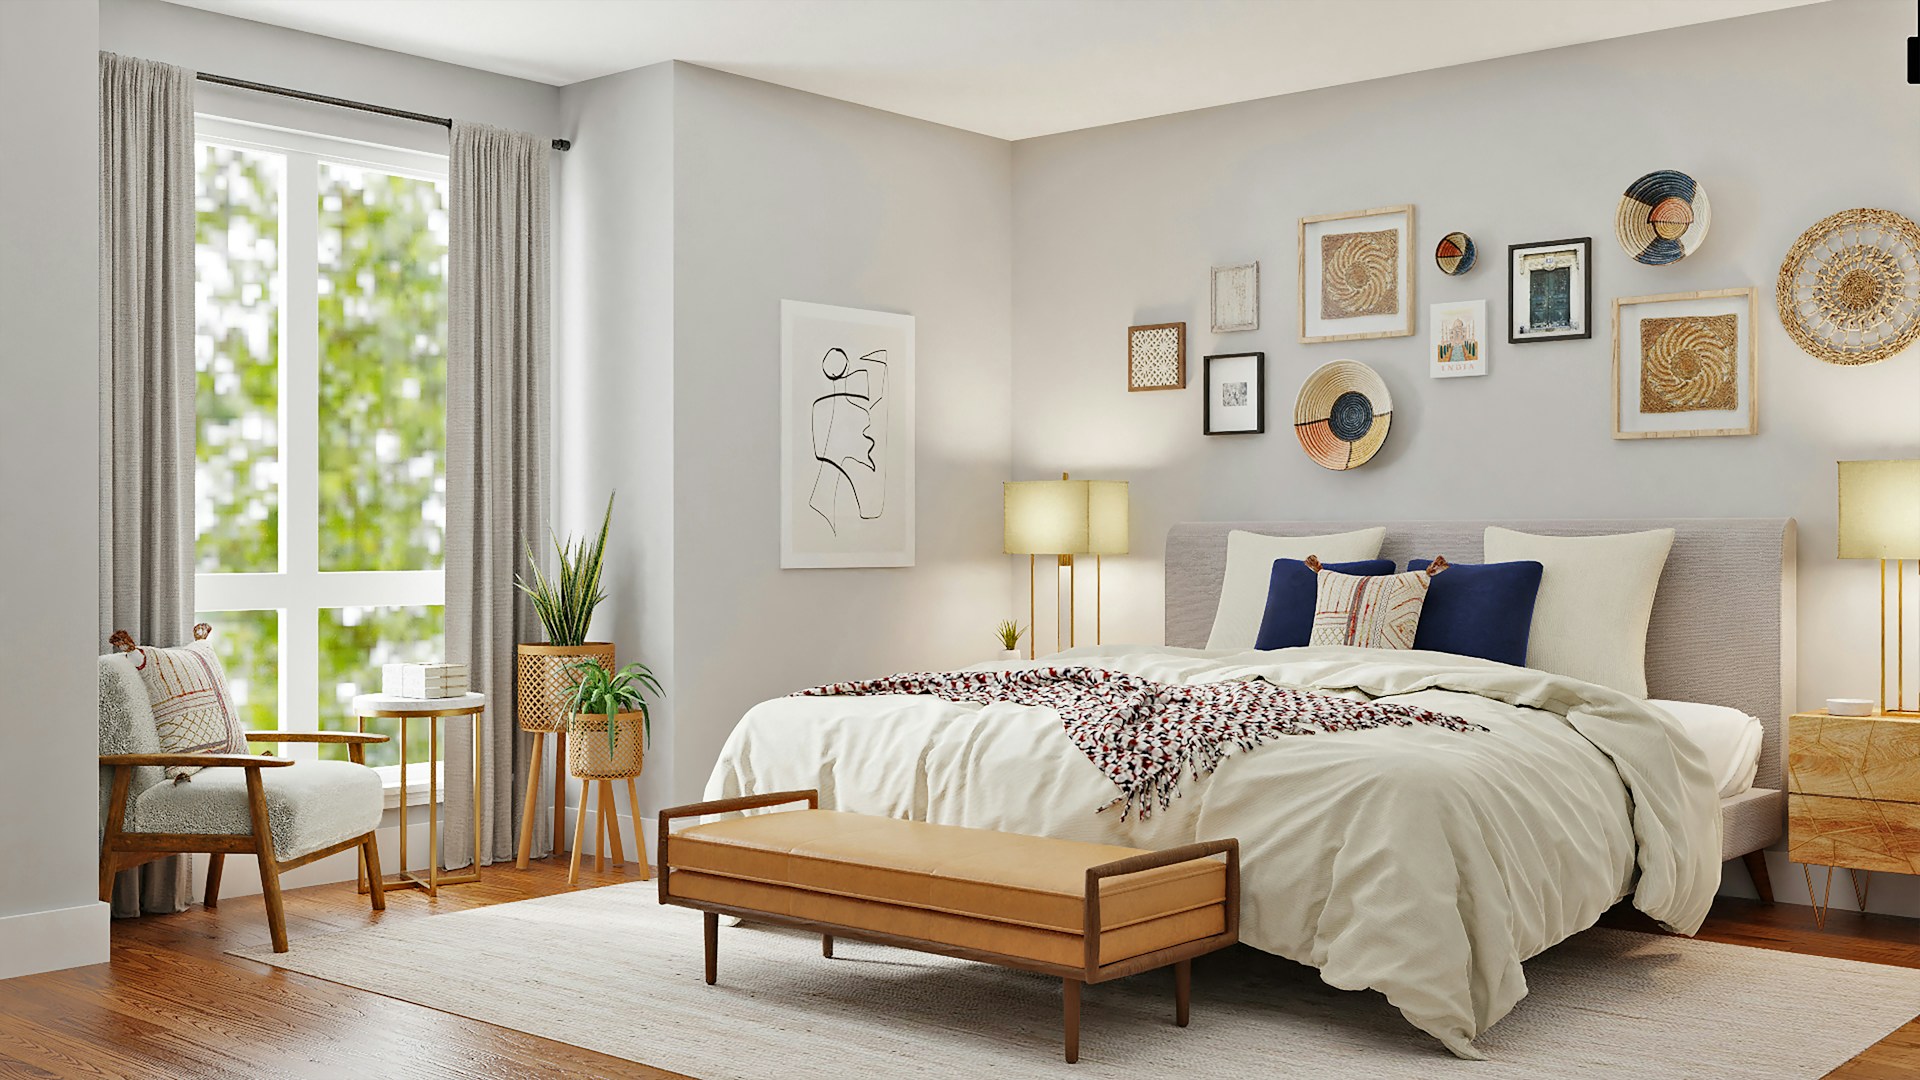 How to Instantly Give Your Bedroom a Facelift?